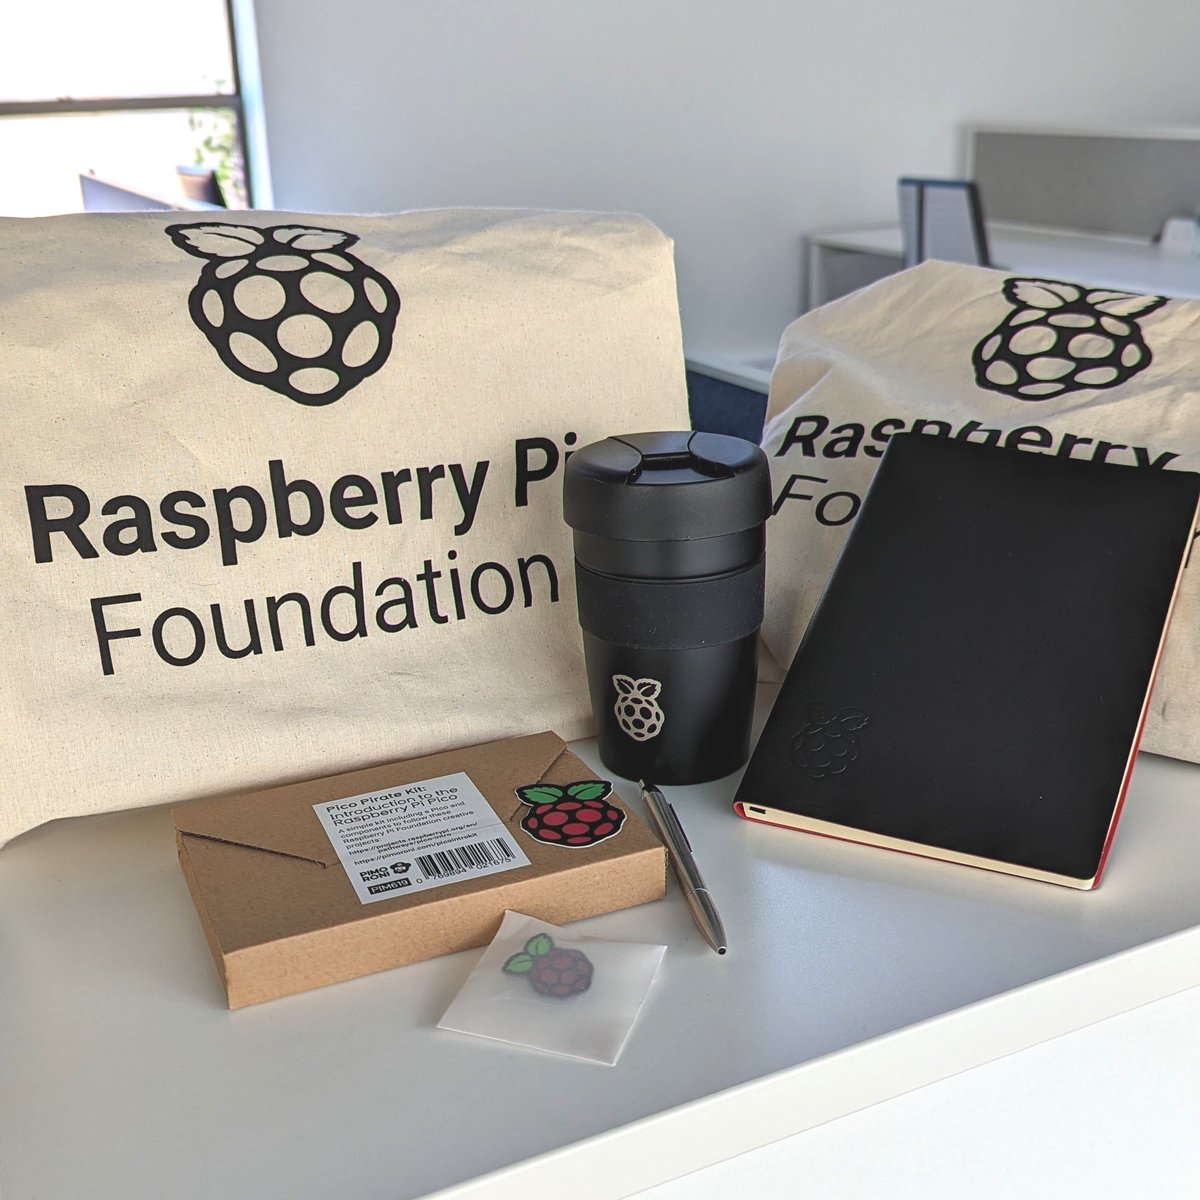 10K FOLLOWER GIVEAWAY 🎉🎈🎁

To celebrate 10K followers on Twitter, we're giving away 3x Raspberry Pi Foundation tote bags containing Raspberry Pi branded goodies 😍 Winners will be randomly selected on Friday, 19 May 2023.

To enter: Follow us, like & RT this tweet.

Good luck!